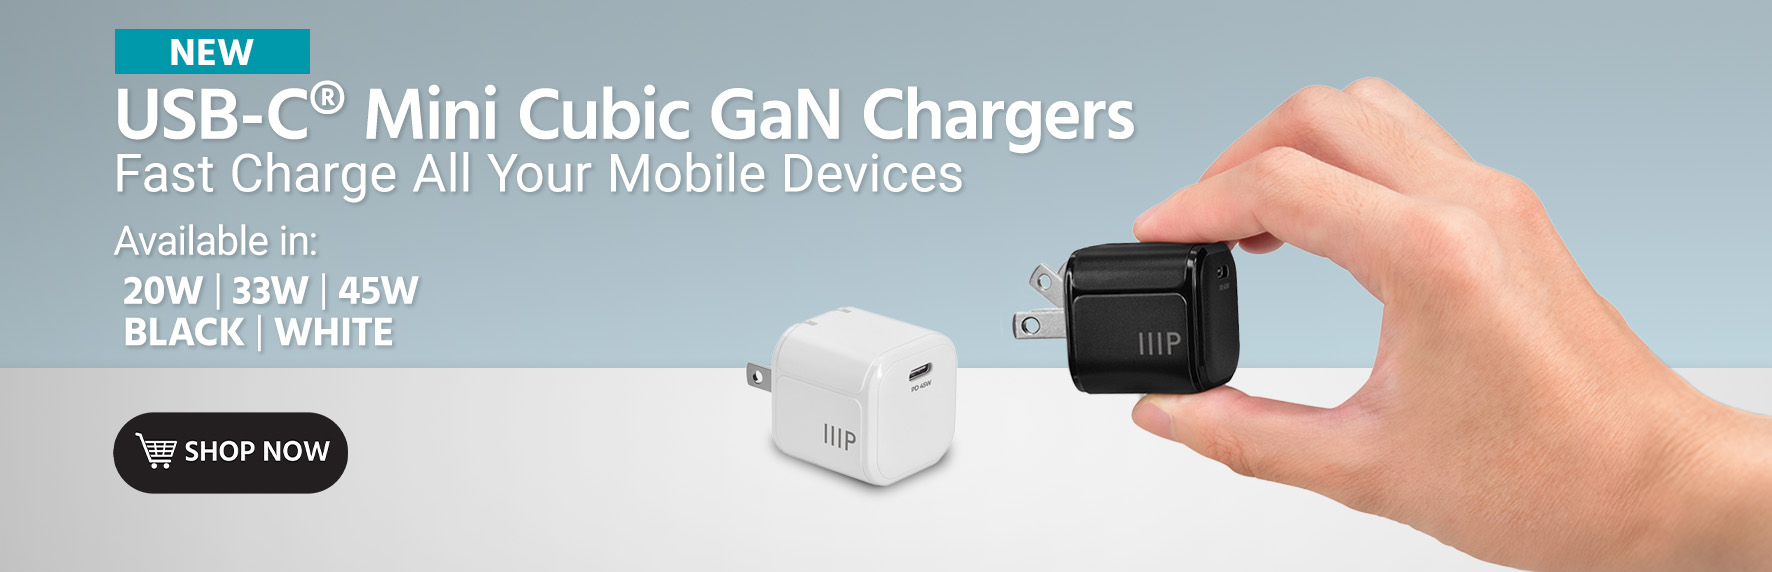 NEW USB-C® Mini Cubic GaN Chargers Fast Charge All Your Mobile Devices Available in: 20W | 33W | 45W BLACK | WHITE Free Standard US Shipping Shop Now